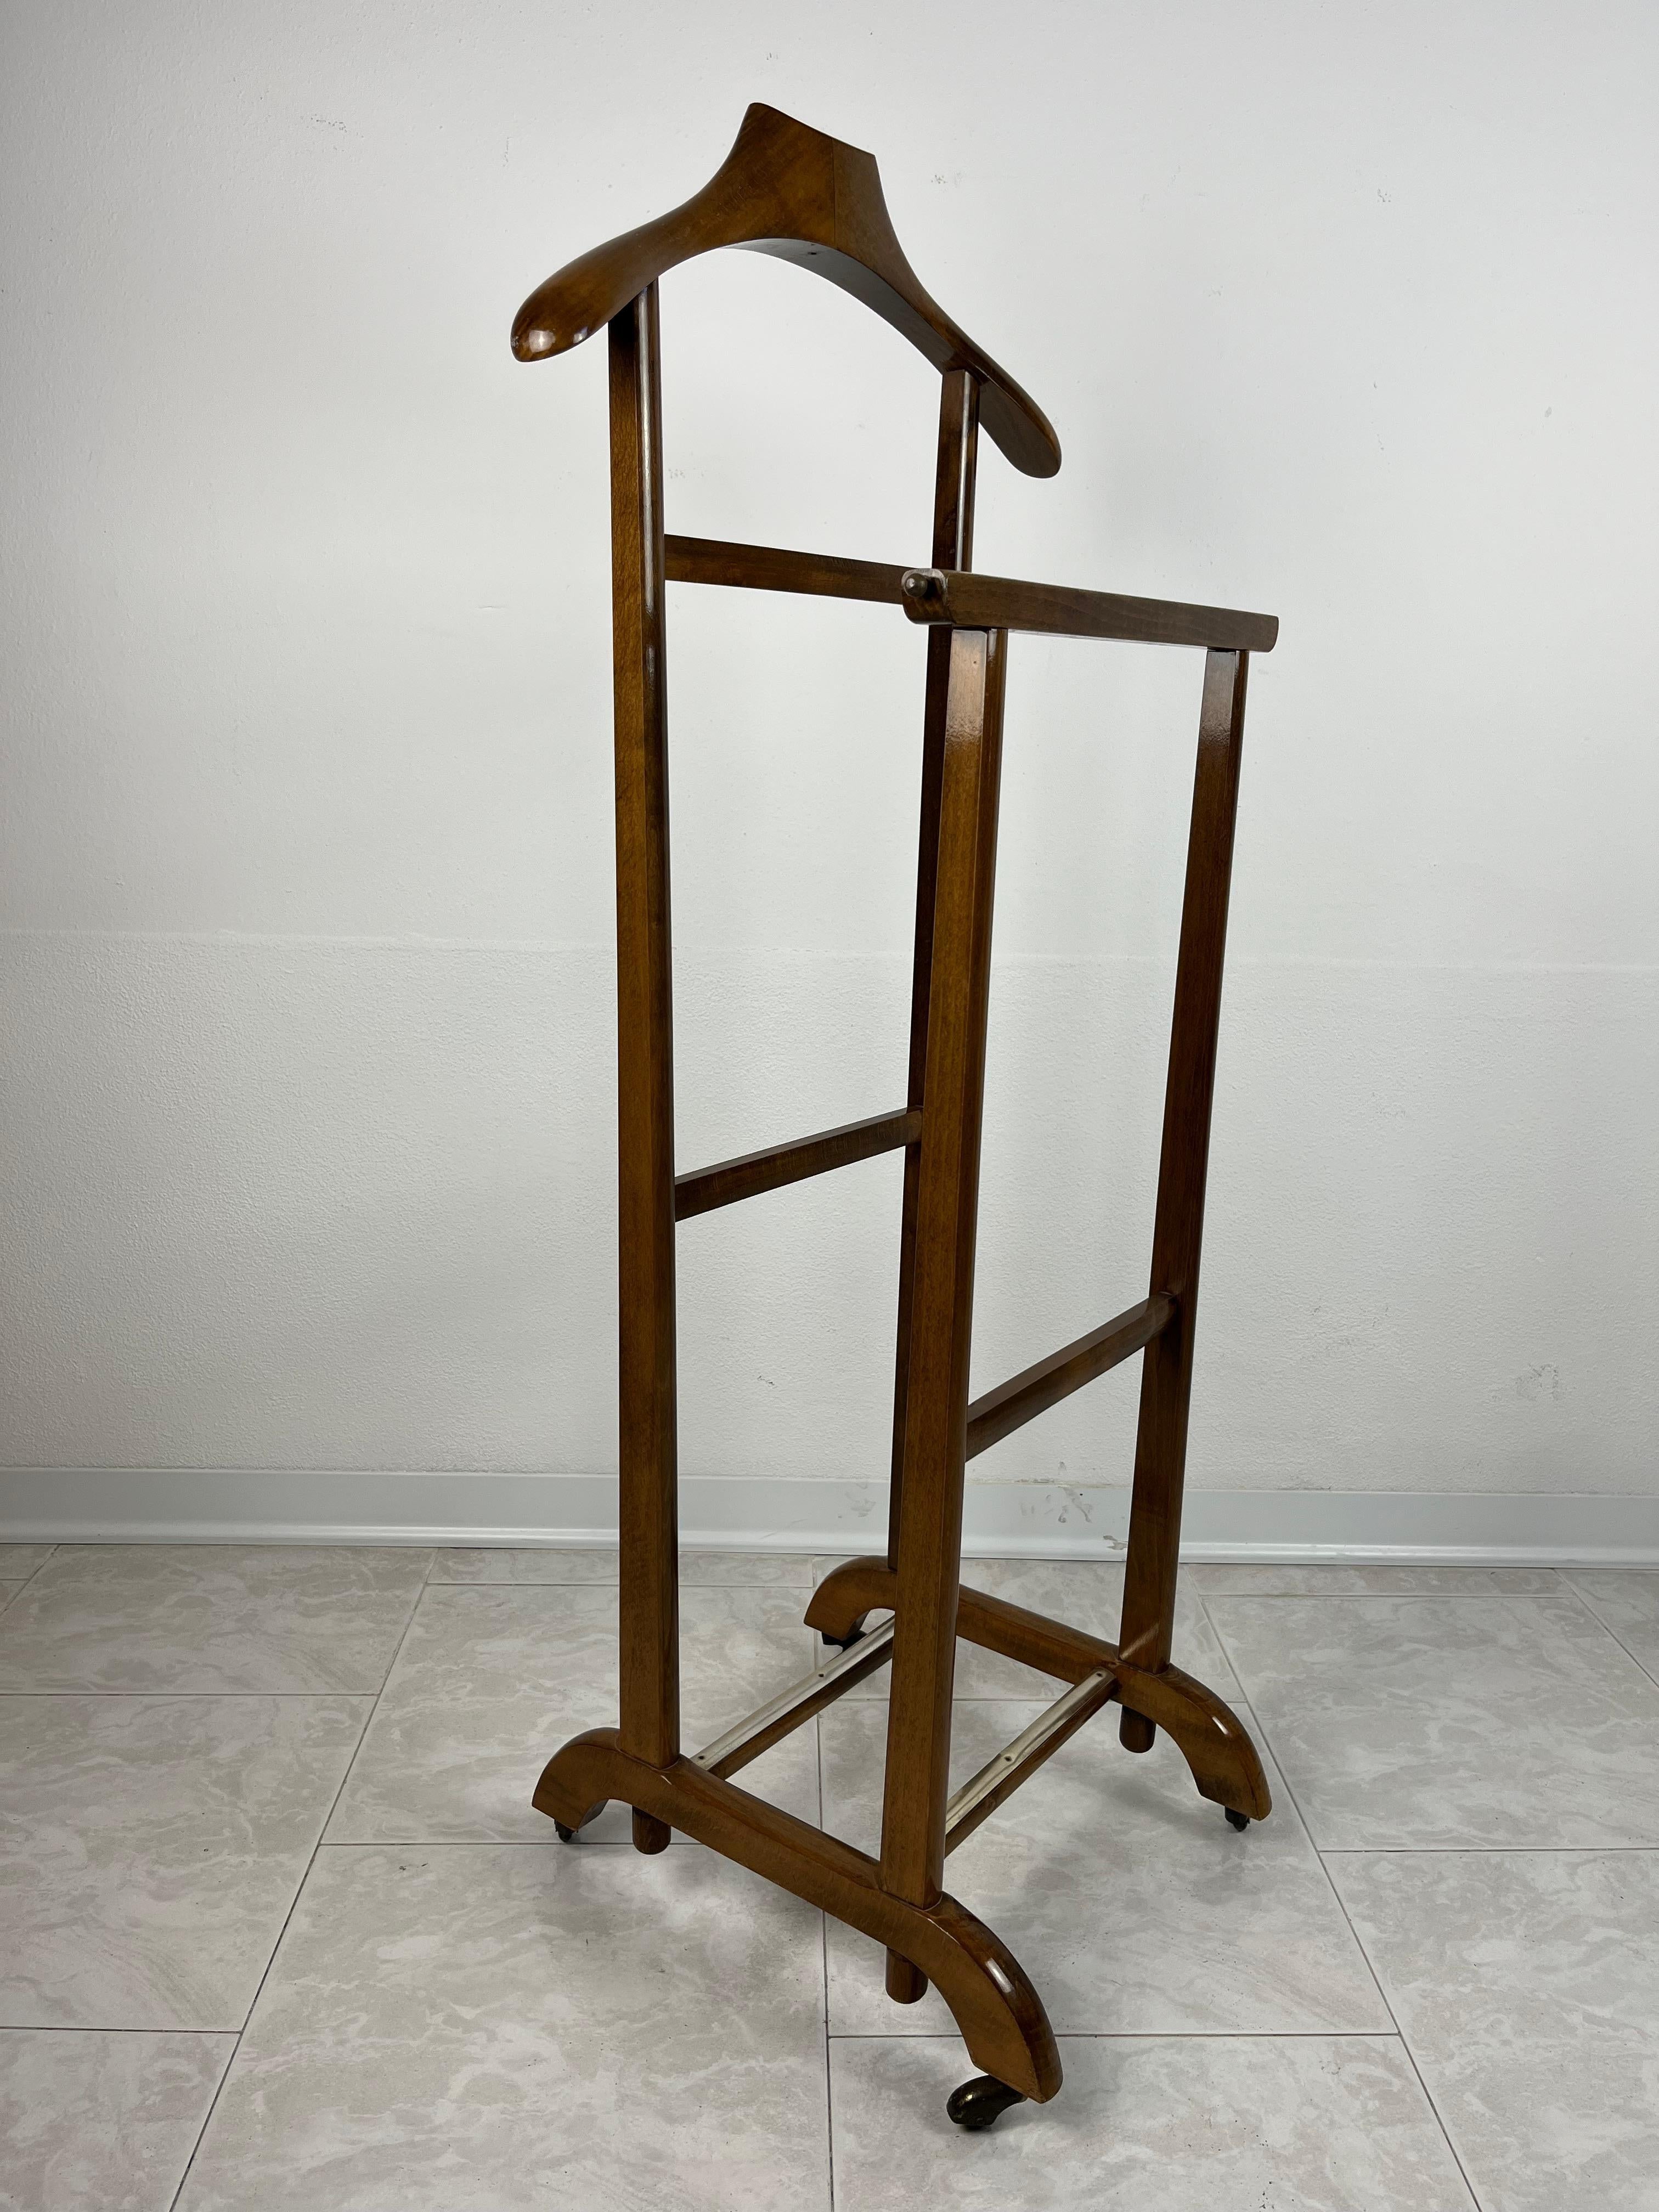 Italian gentleman's valet, 1960s.
It belonged to my grandfather, it is made of wood and brass details.
With 4 swivel castors, it has two pull-out tie racks.